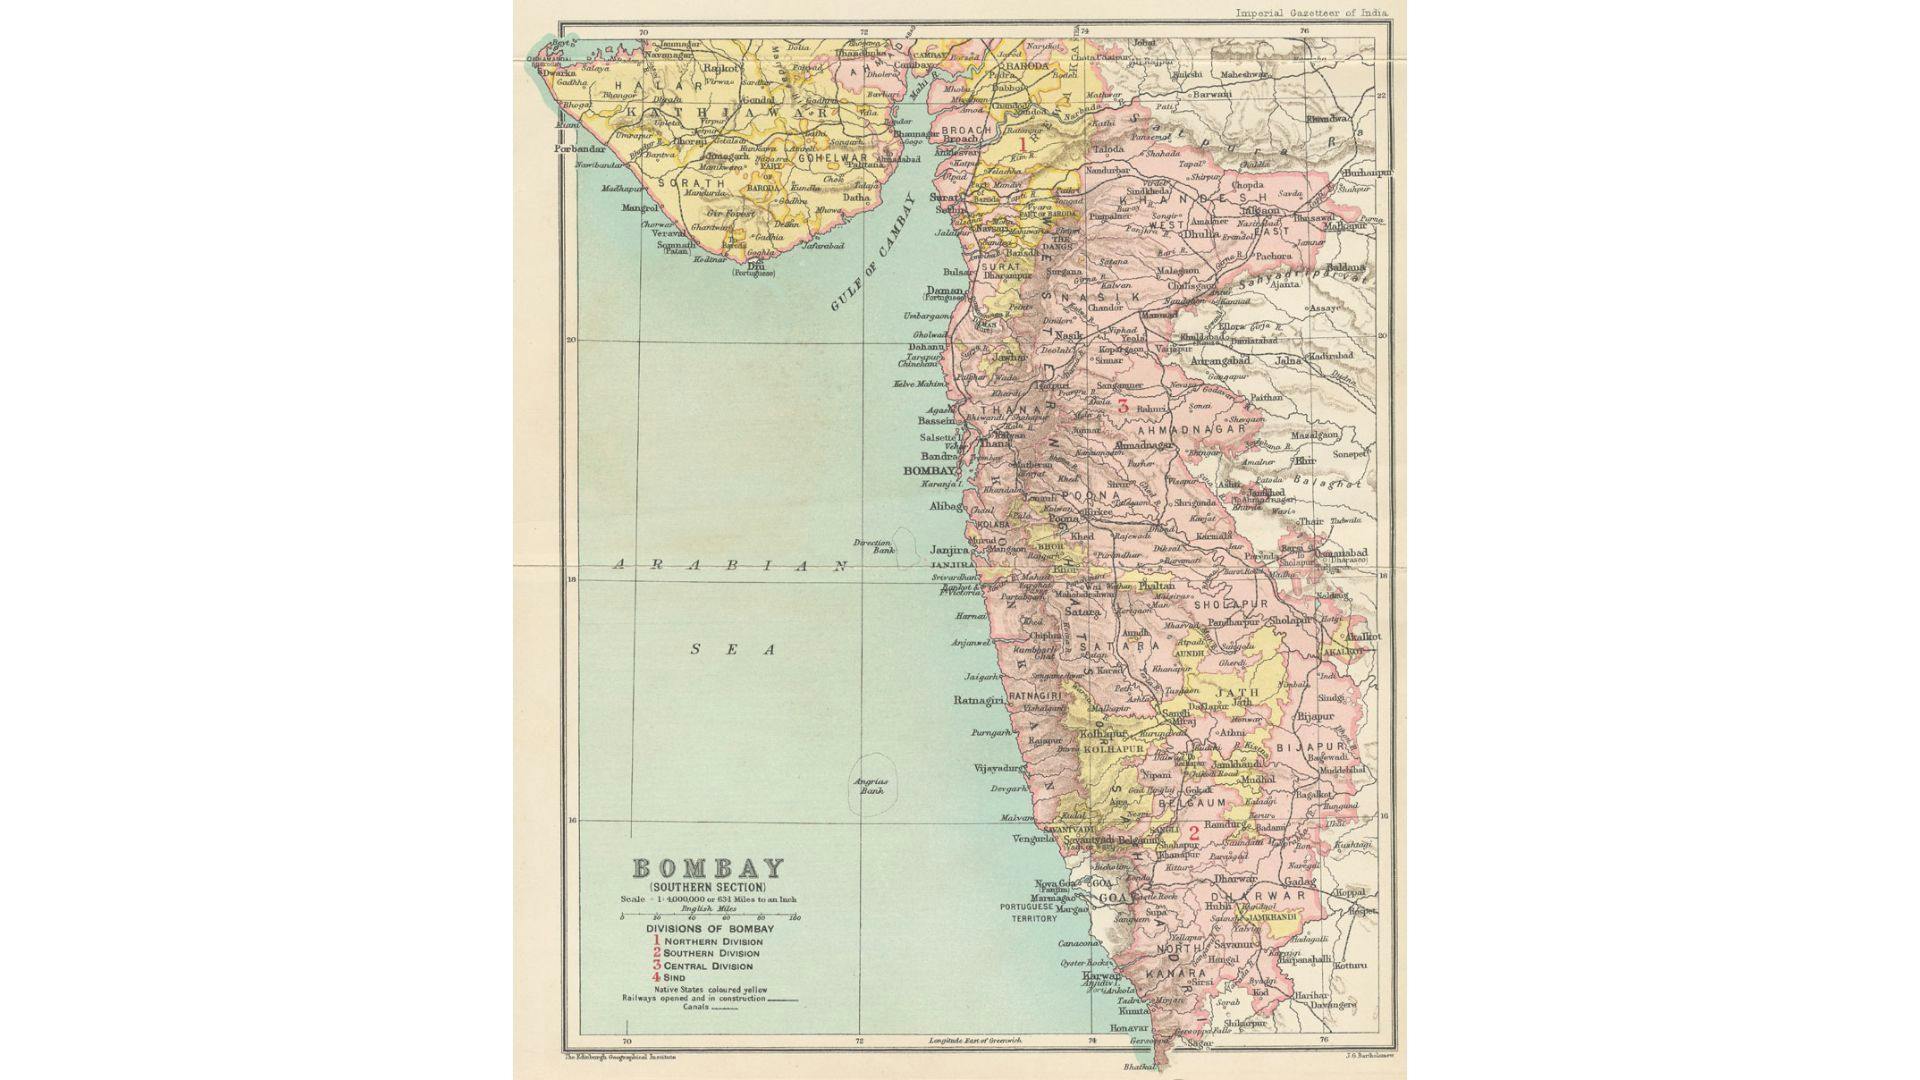 Map of Bombay Presidency Southern Section (Deccan) | Wikimedia Commons